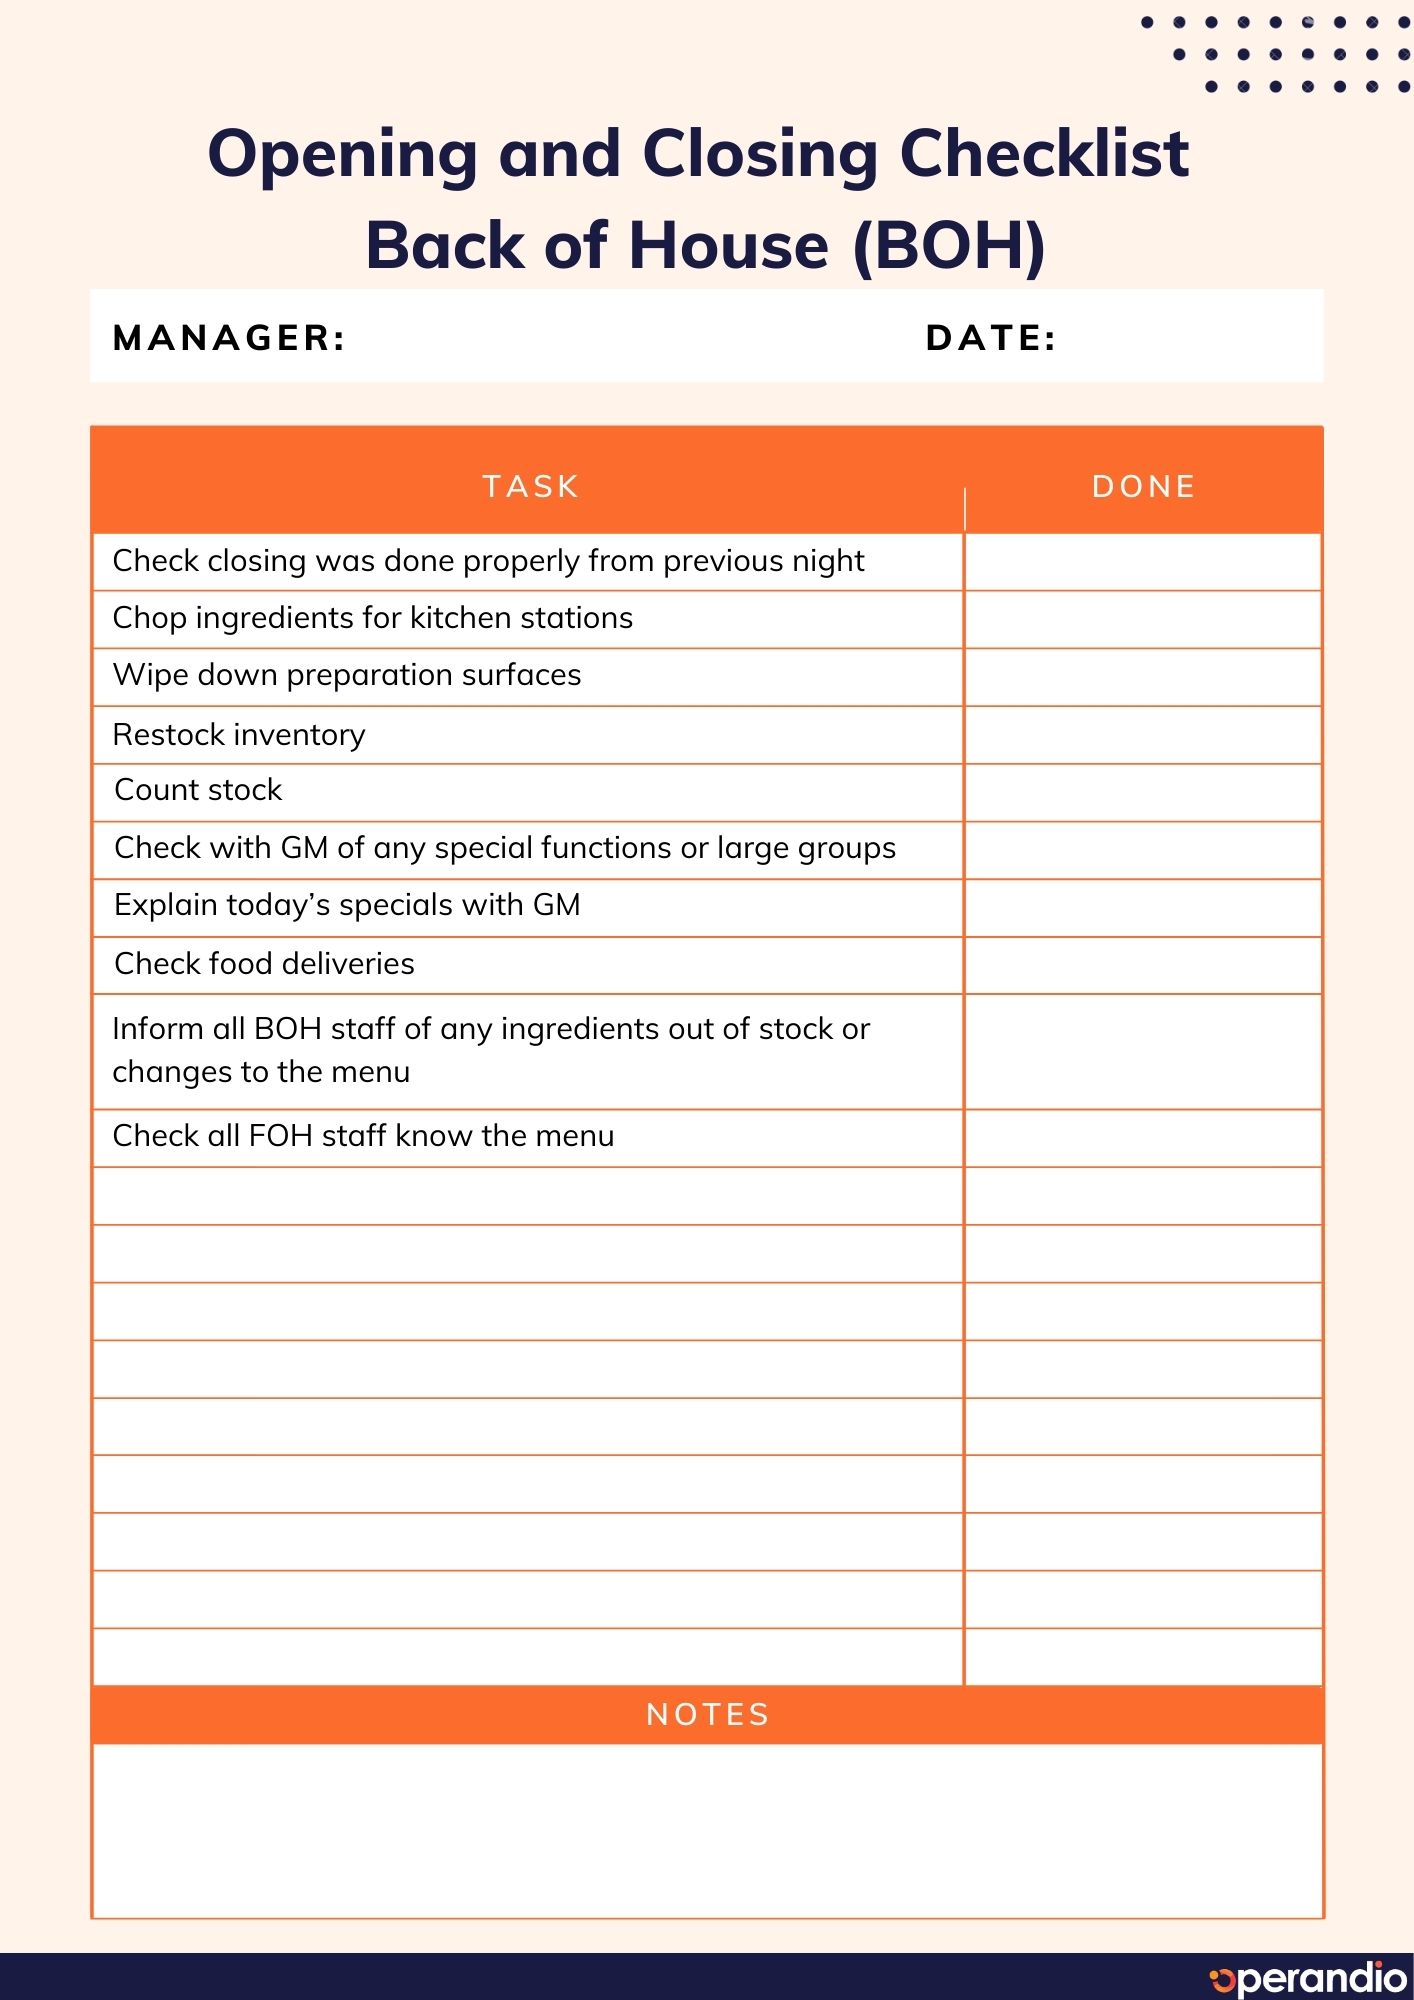 Opening and closing checklist template page4